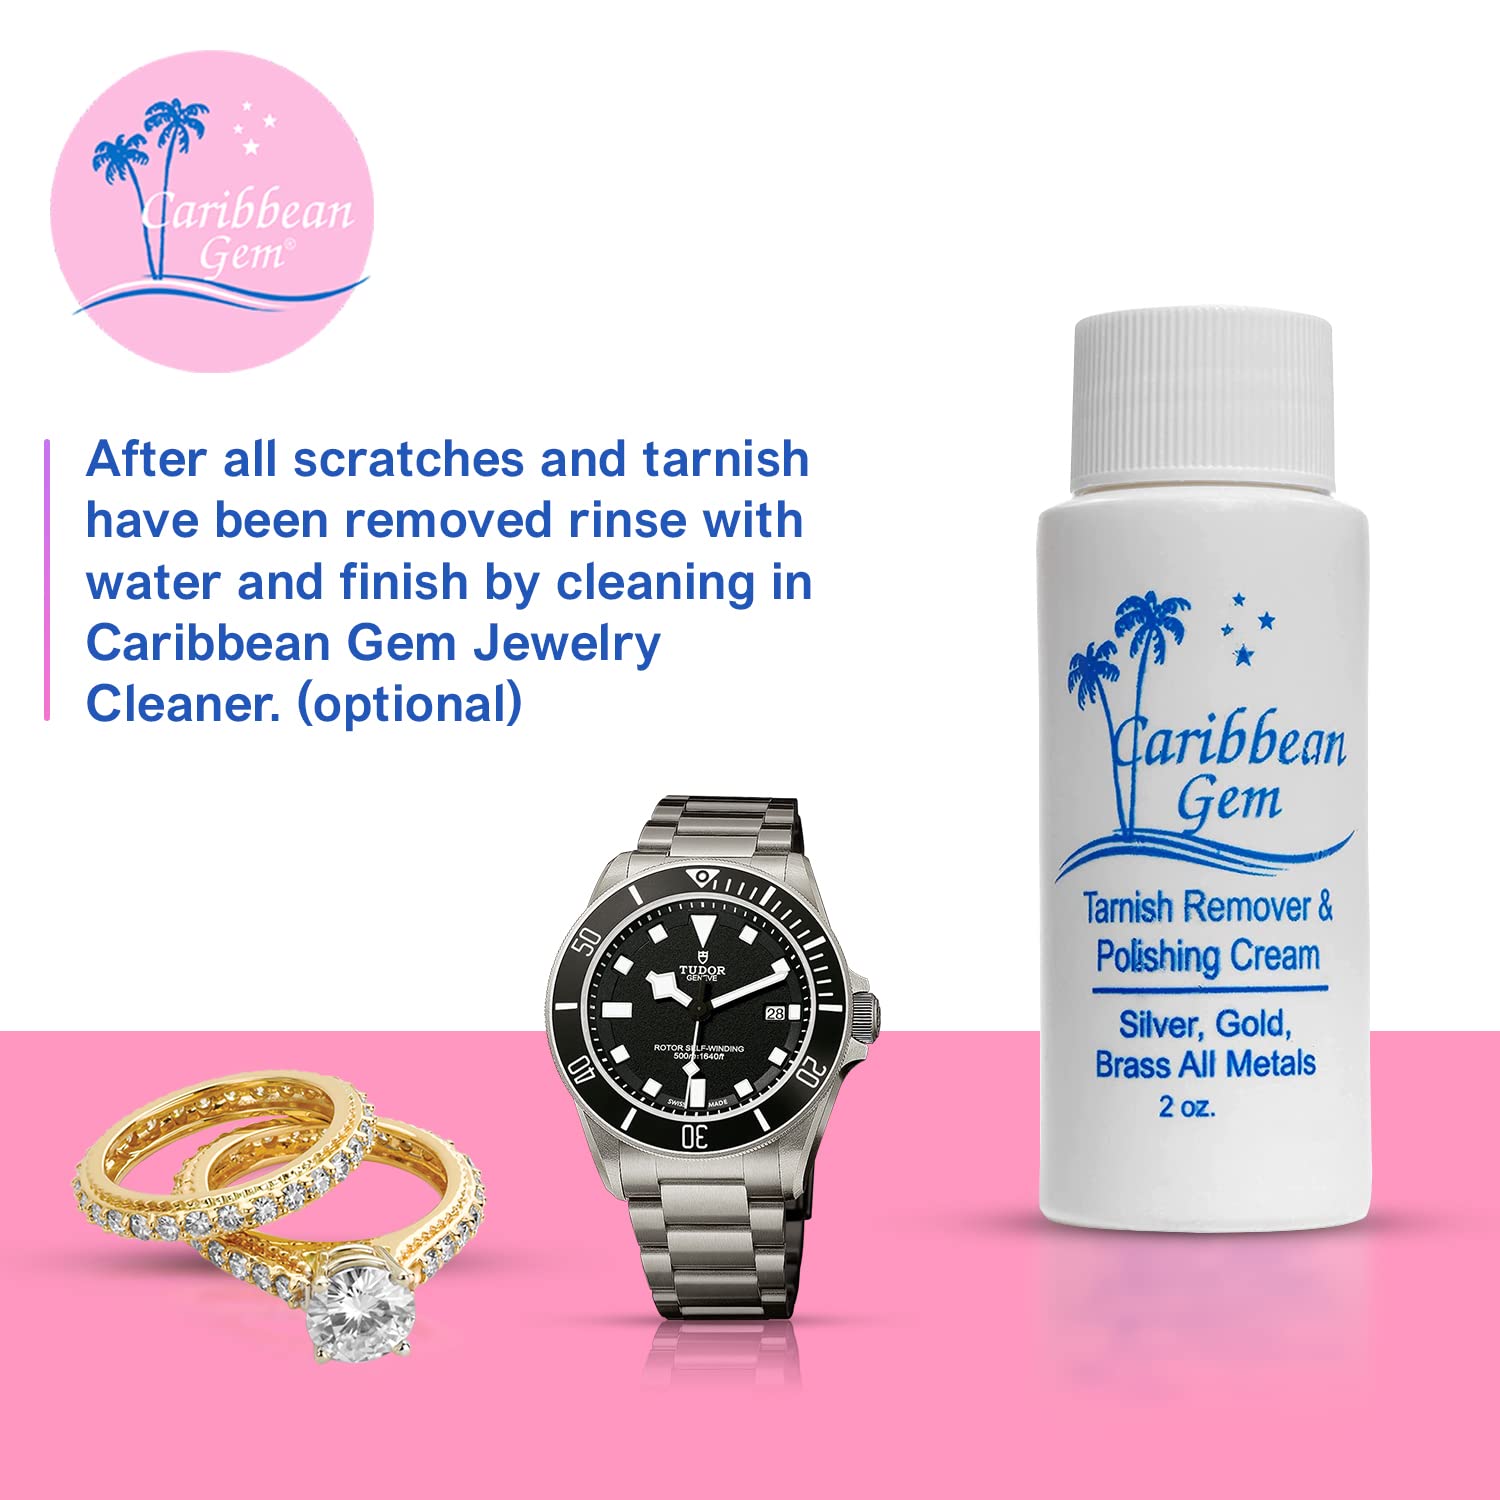 Caribbean Gem Jewelry Cleaner 8 oz & 16 oz Refill, Basket, Brush, Polishing  Cream, Ammonia Free Jewelry Cleaning Kit for All Gold, Silver, Diamonds